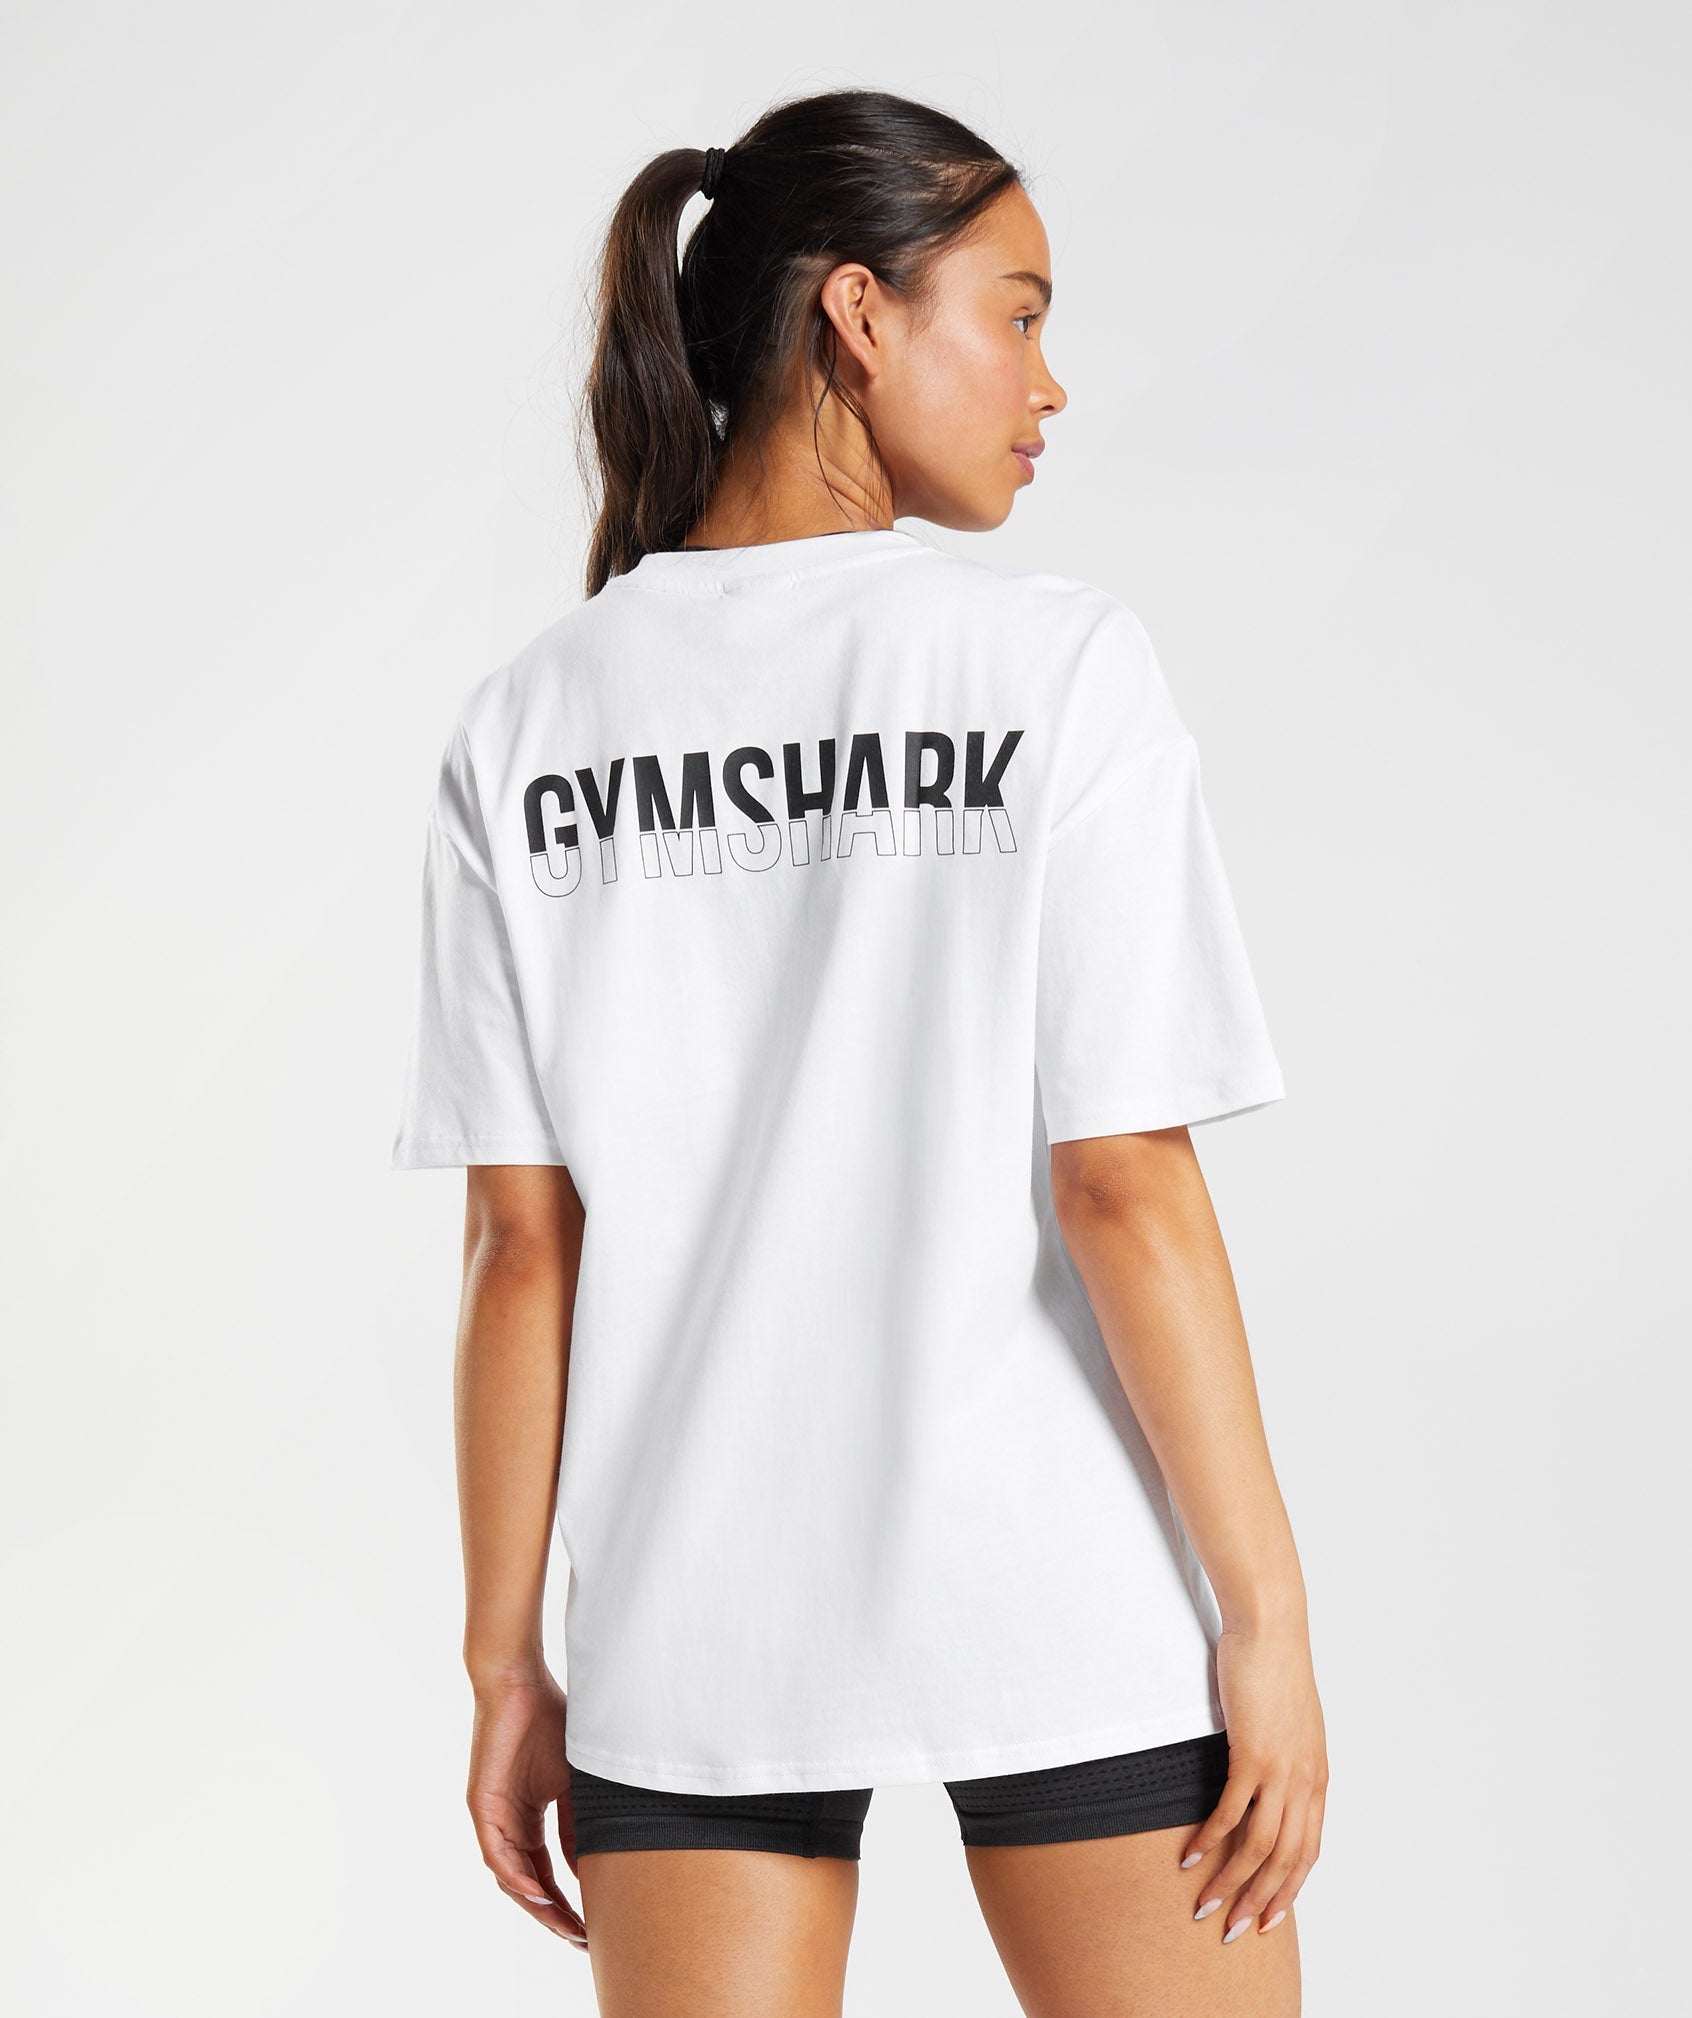 Seamless Open Back Womens Athletic Top For Sports, Fitness, Yoga, And Gym  Workouts Long Sleeve Crop Top With Top Activewear Clothes For Women Style  #231017 From Yao03, $12.89